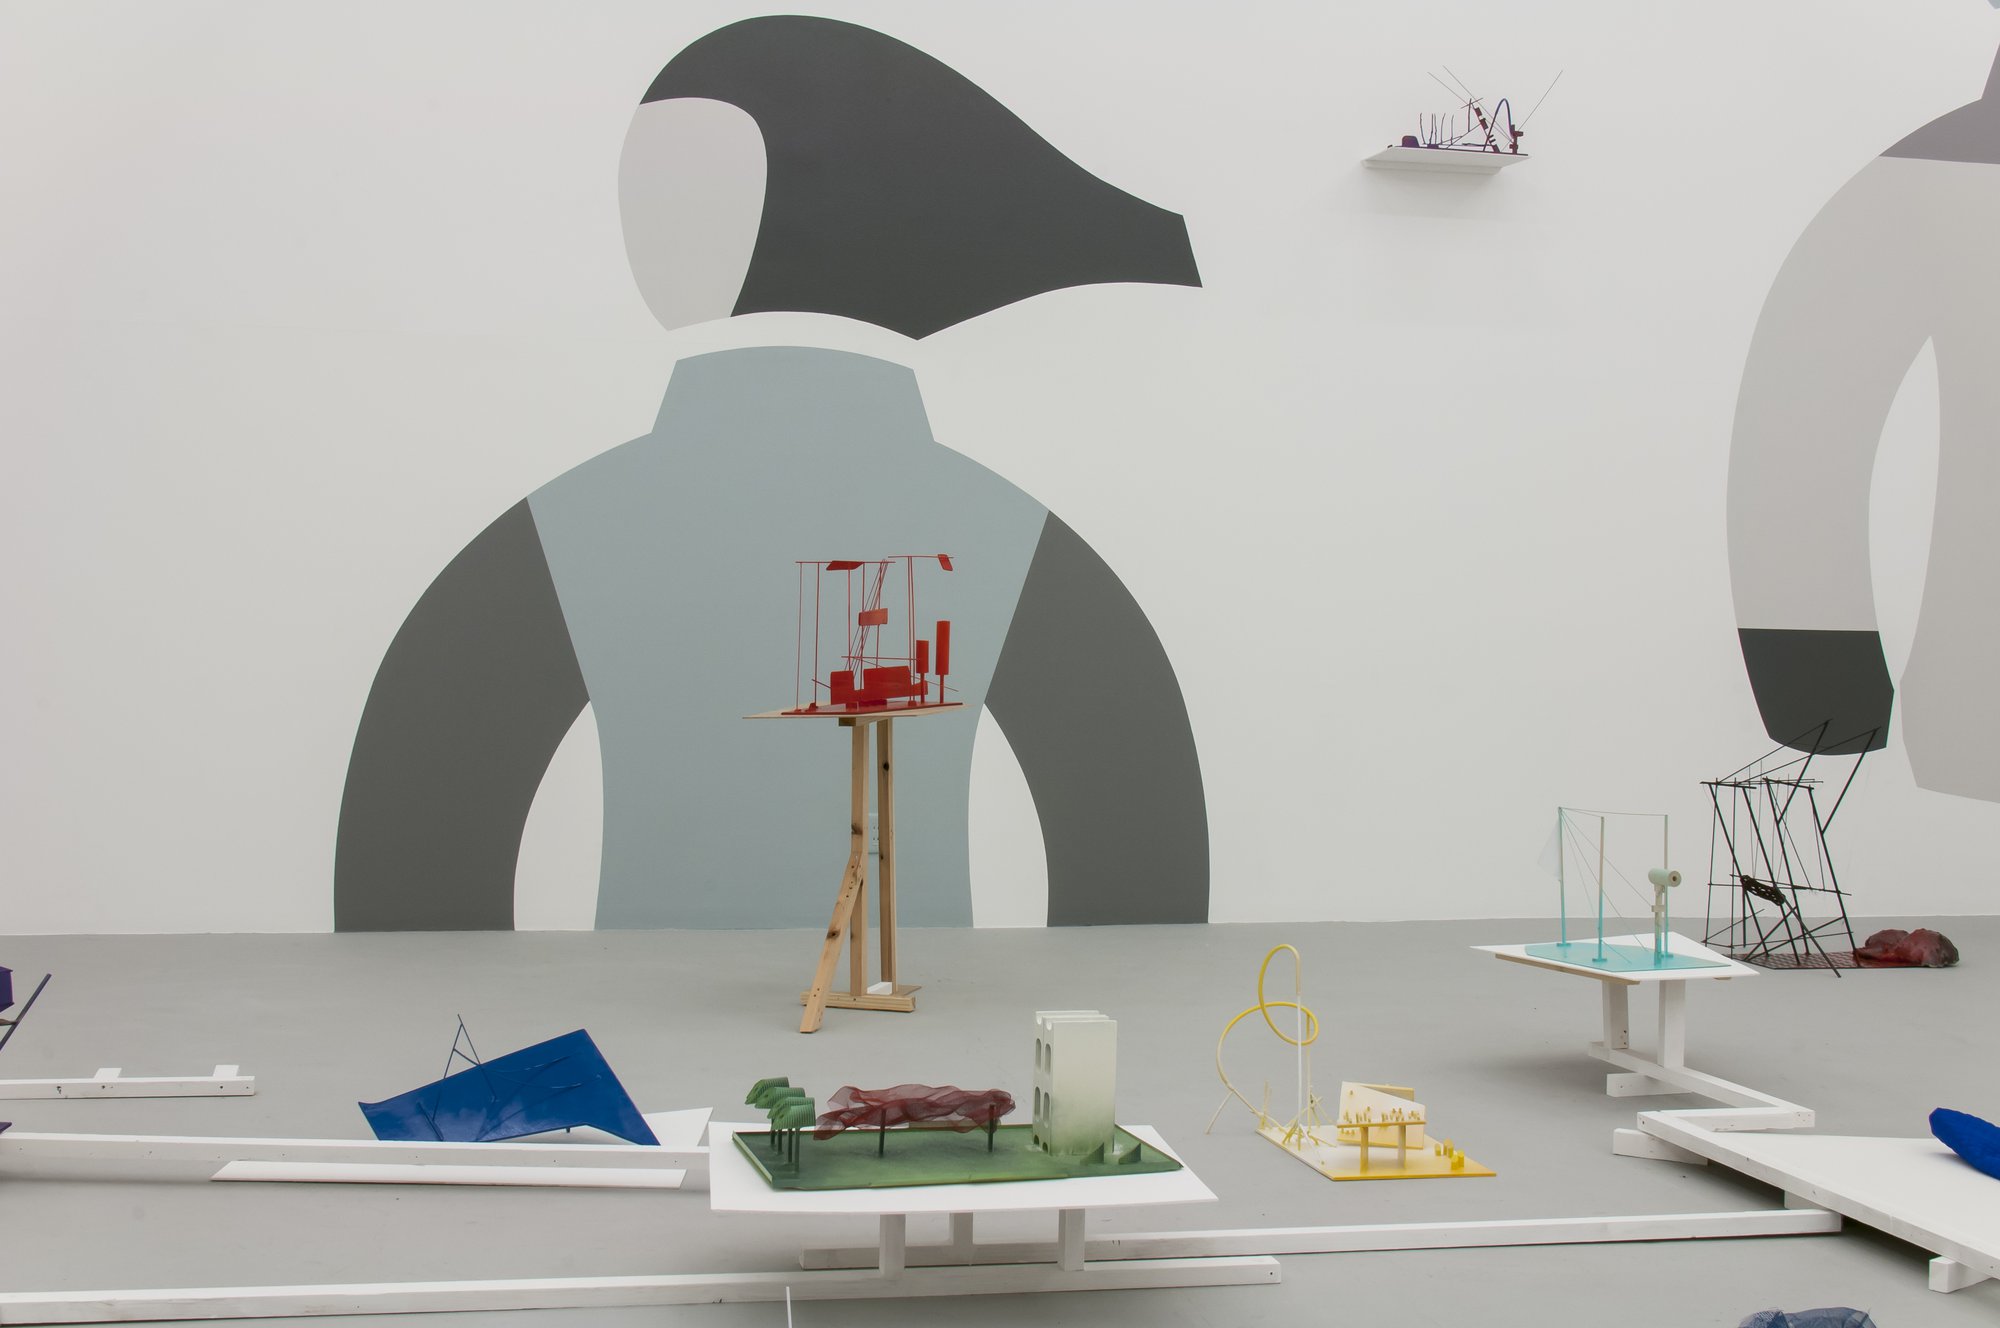 Emre Hüner, Floating Cabin Rider Capsule Reactor Cycle, wood, clay, paint, wall drawings, fabric, polyurethane, steel, various material, dimensions variable, 2015. Installation view, CCA Kitakyushu, 2015